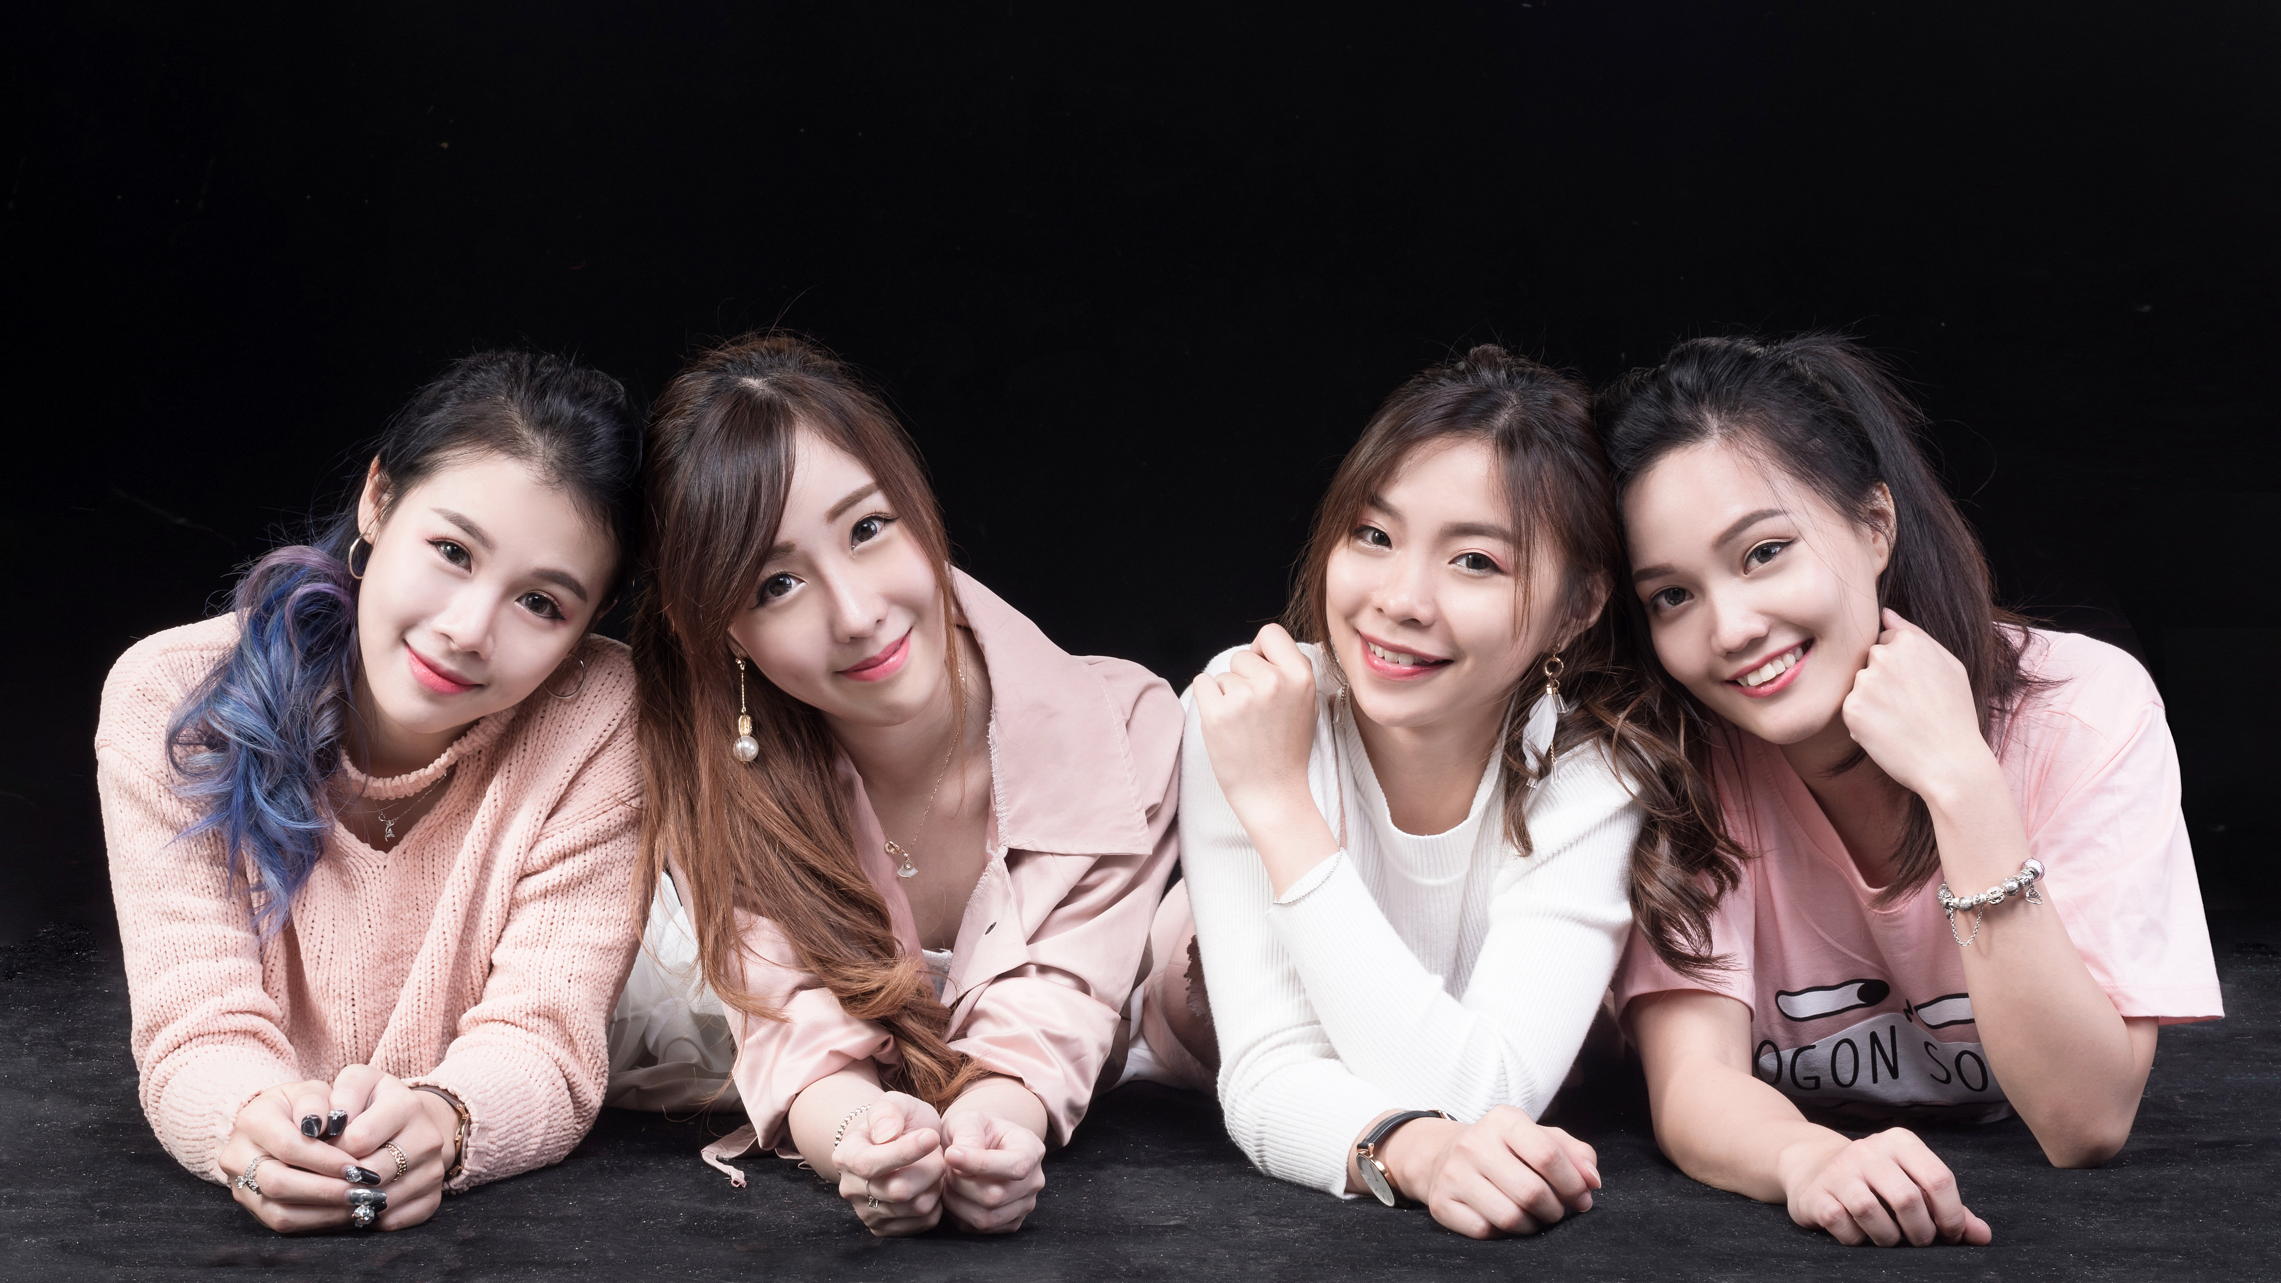 People 2281x1283 Asian model women lying down long hair brunette dyed hair ponytail bracelets necklace wristwatch earring painted nails pullover shirt black background group of women smiling